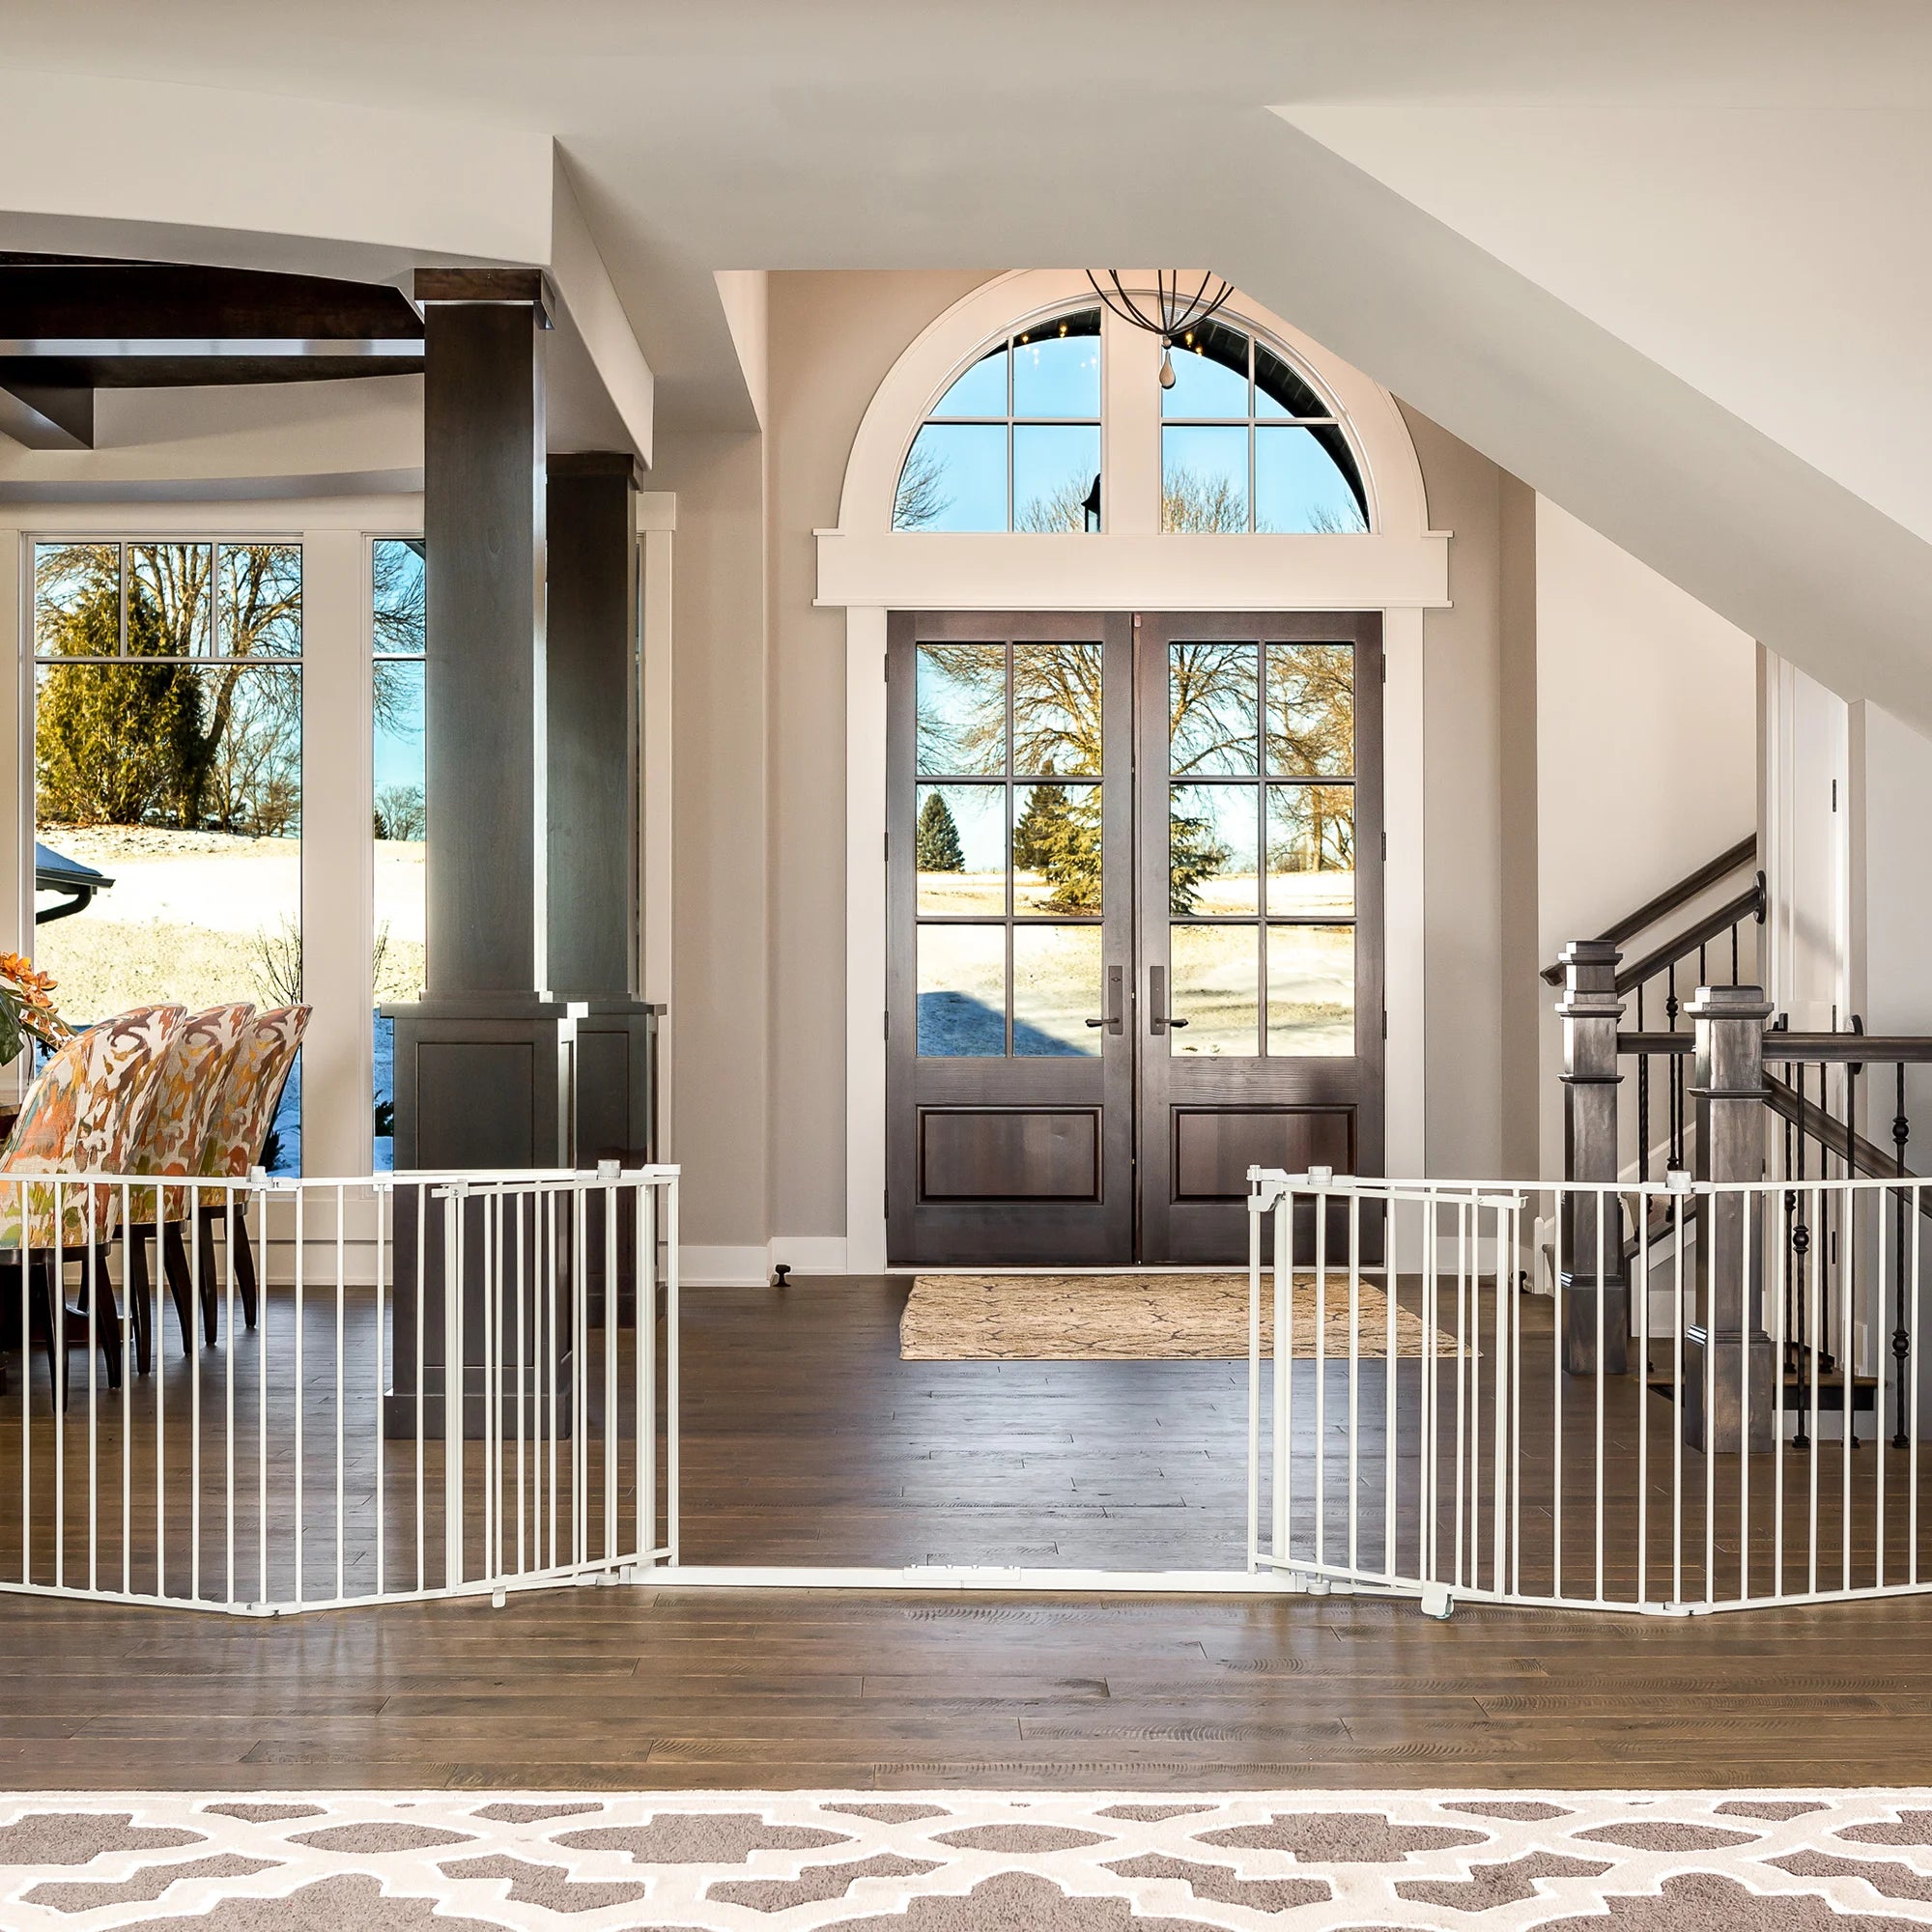 The Double Door Super Wide Pet Gate and Pet Yard with its two doors open.